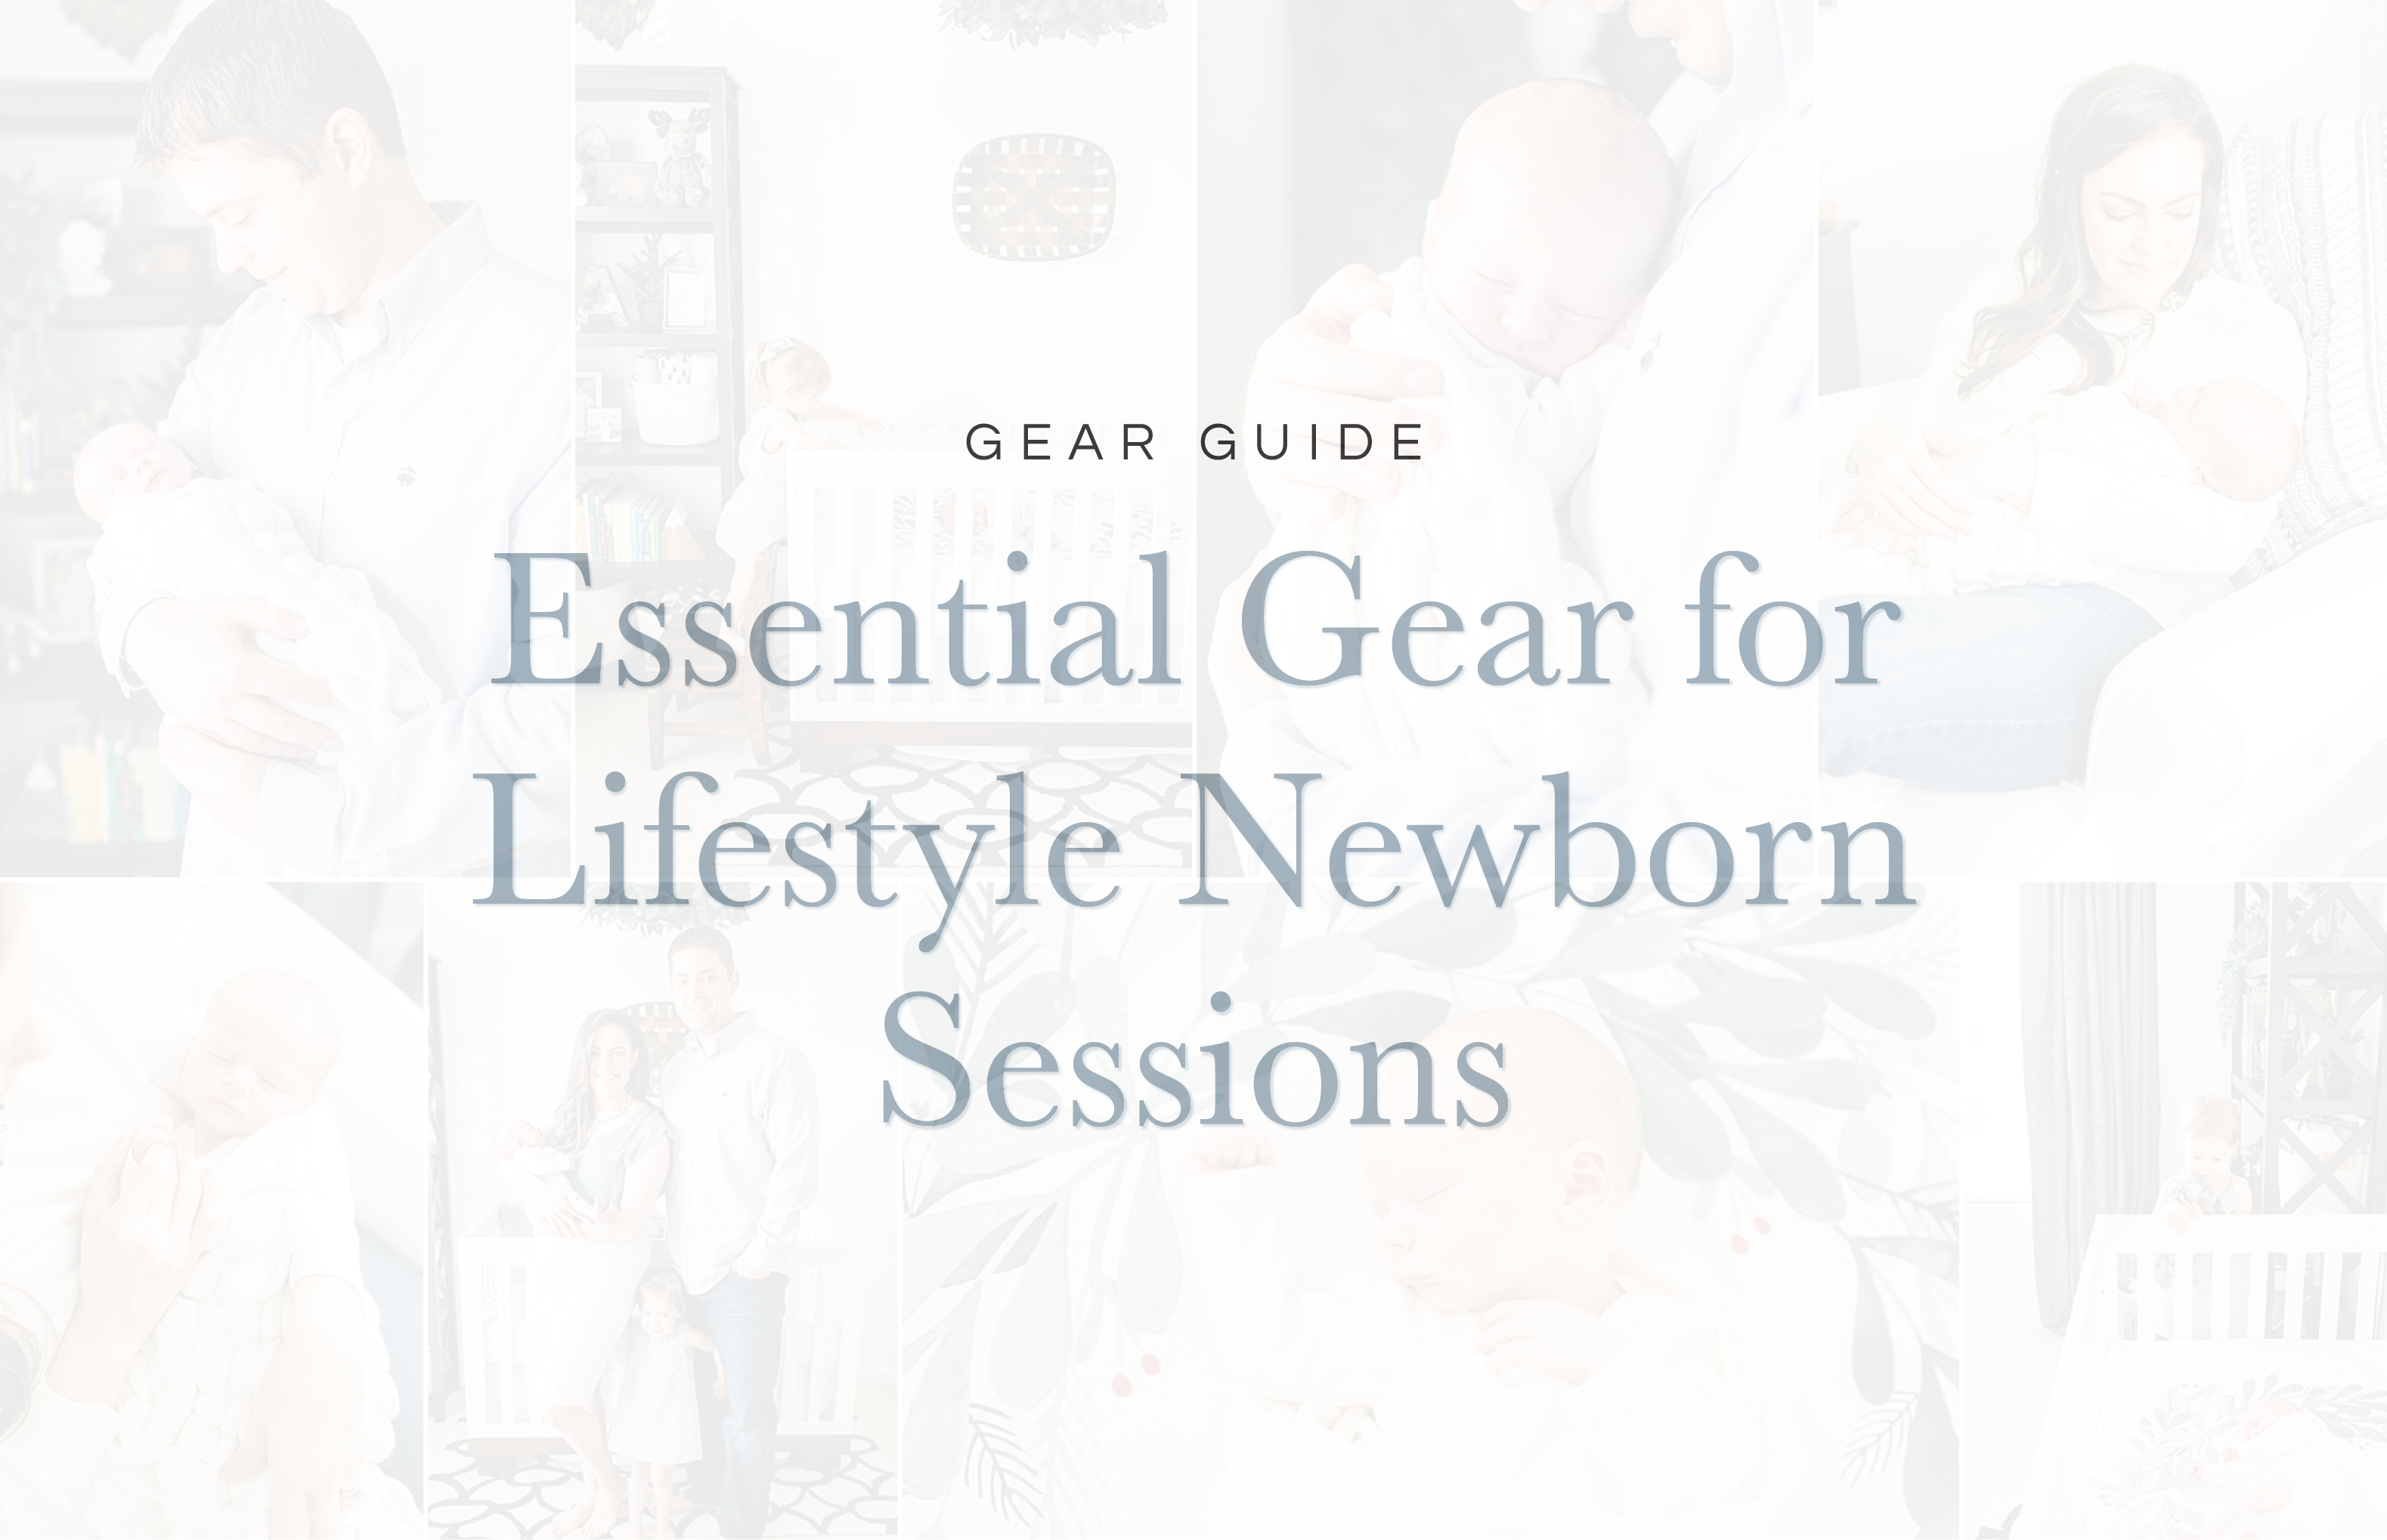 How to Choose the Right Gear for a Lifestyle Newborn Session